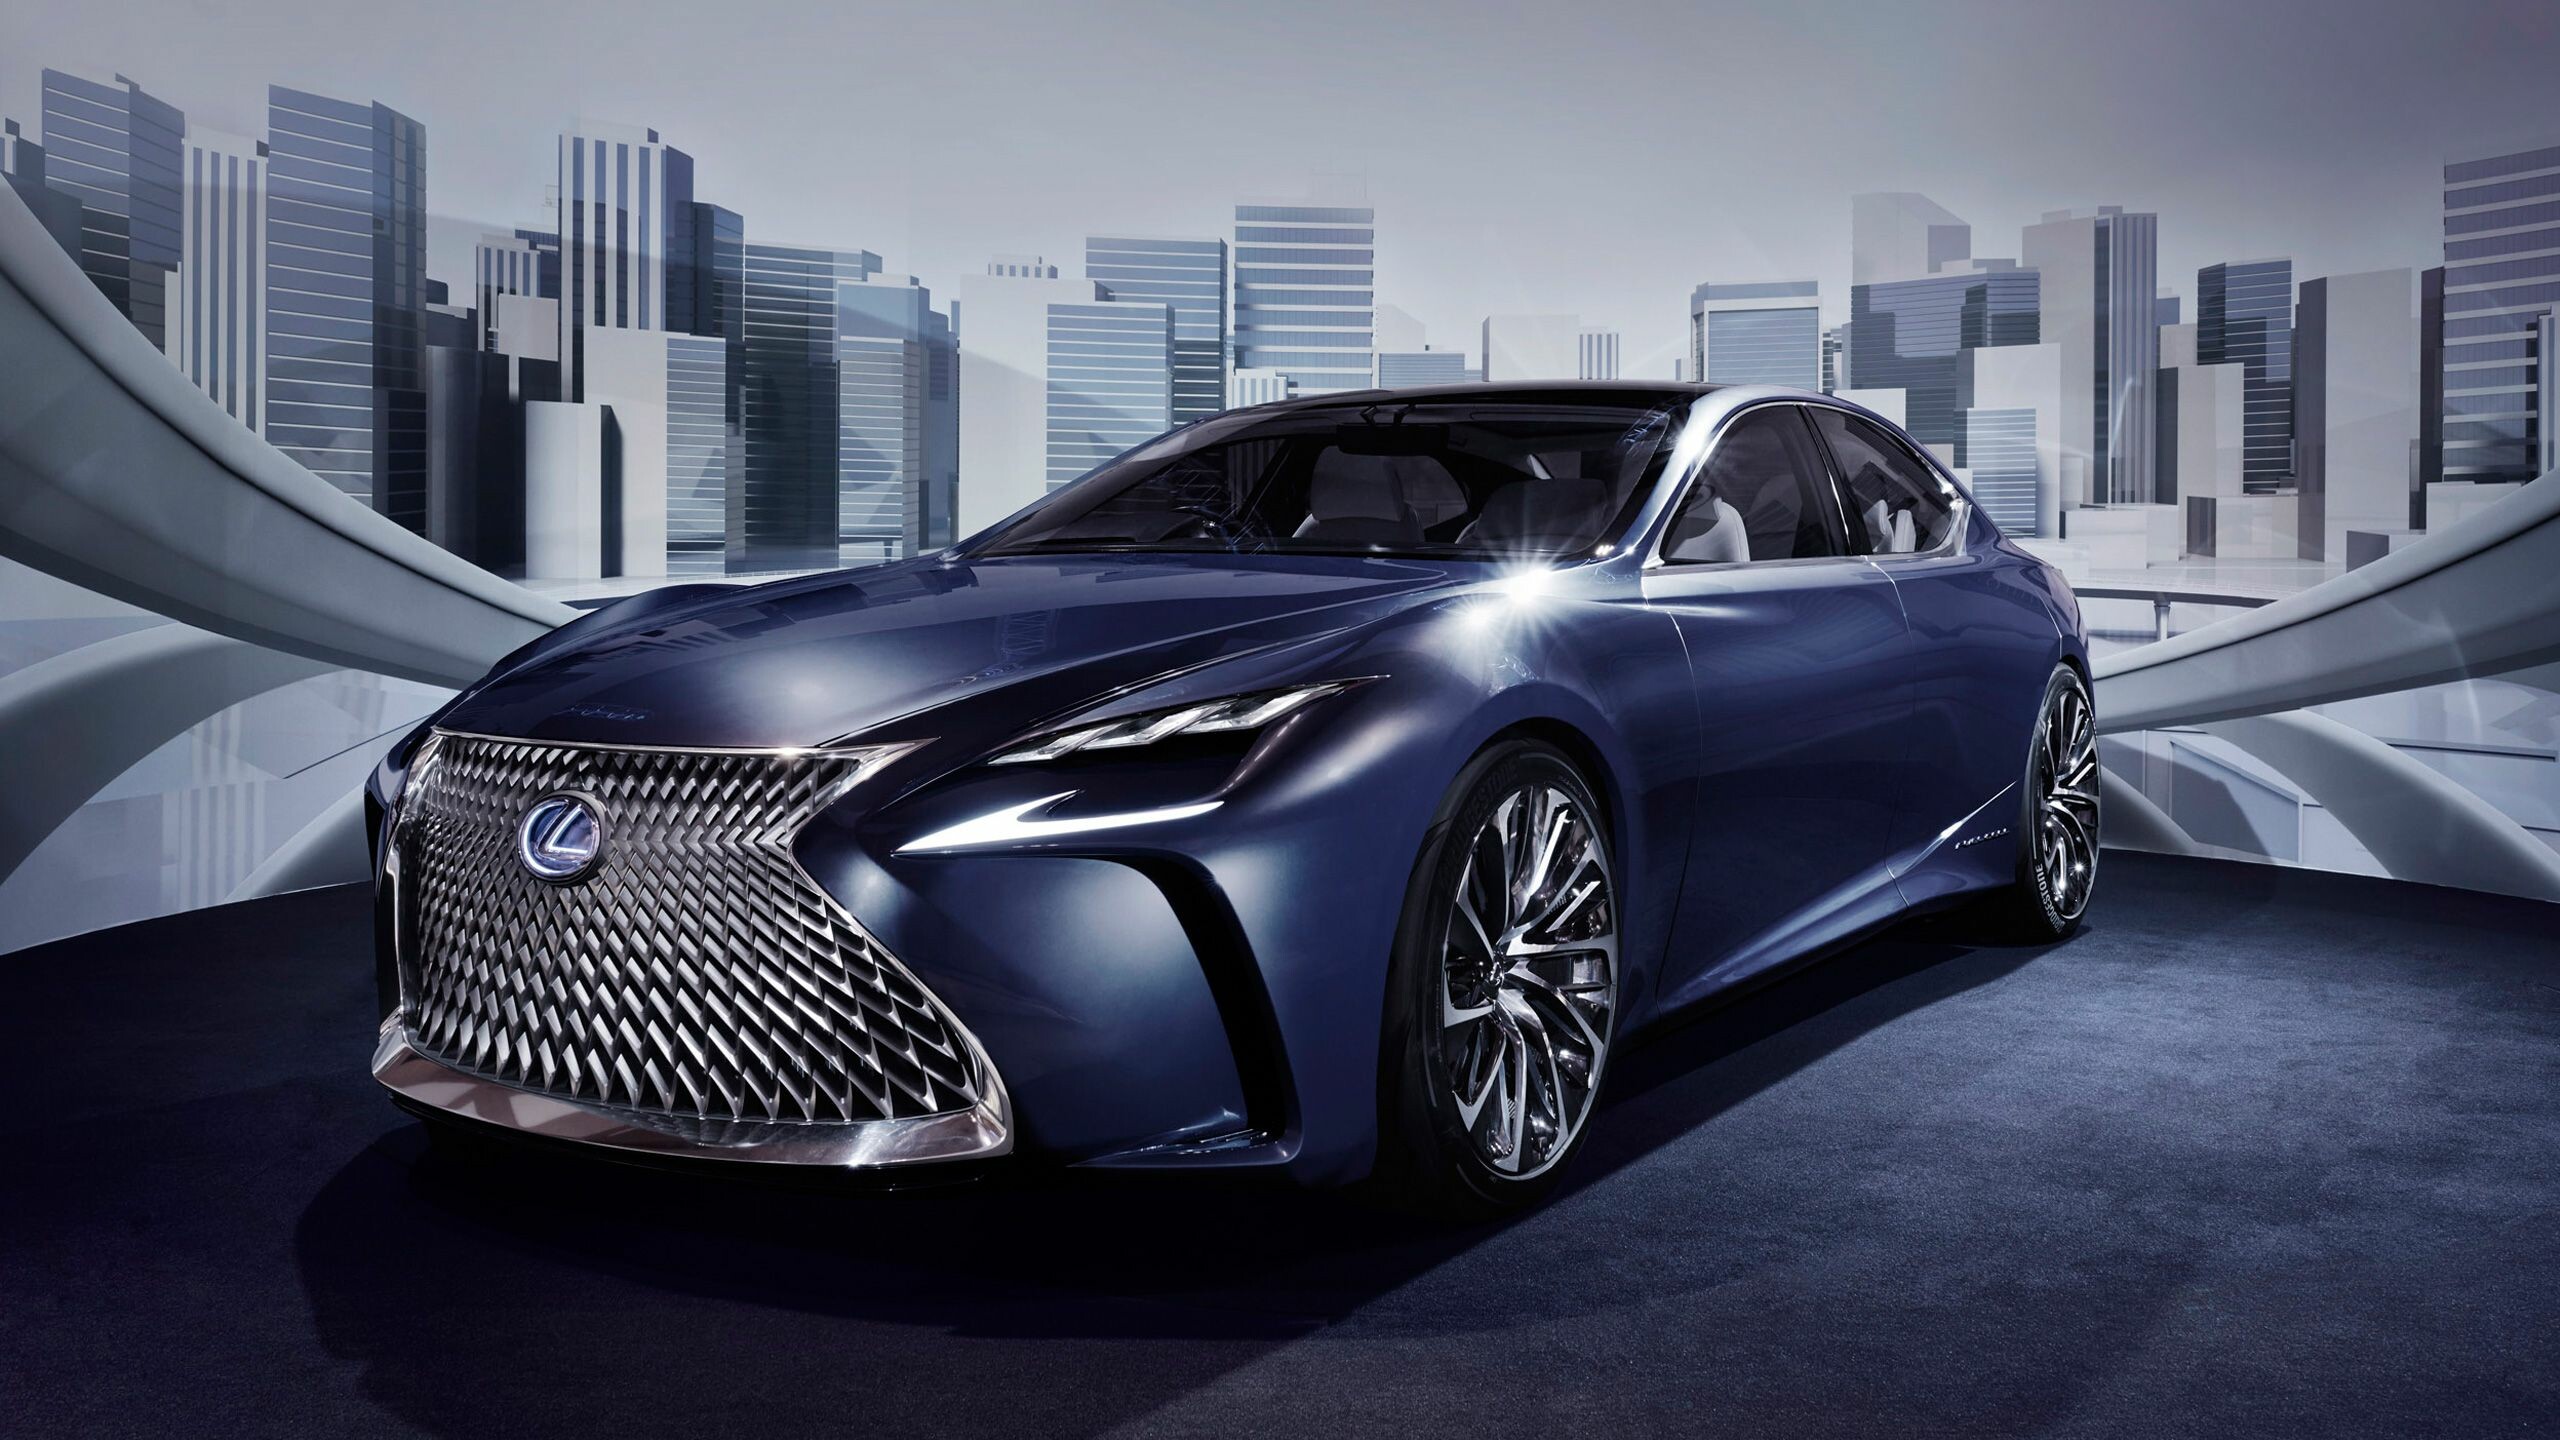 Lexus: Japan-based automobile company, The famous spindle grille. 2560x1440 HD Background.